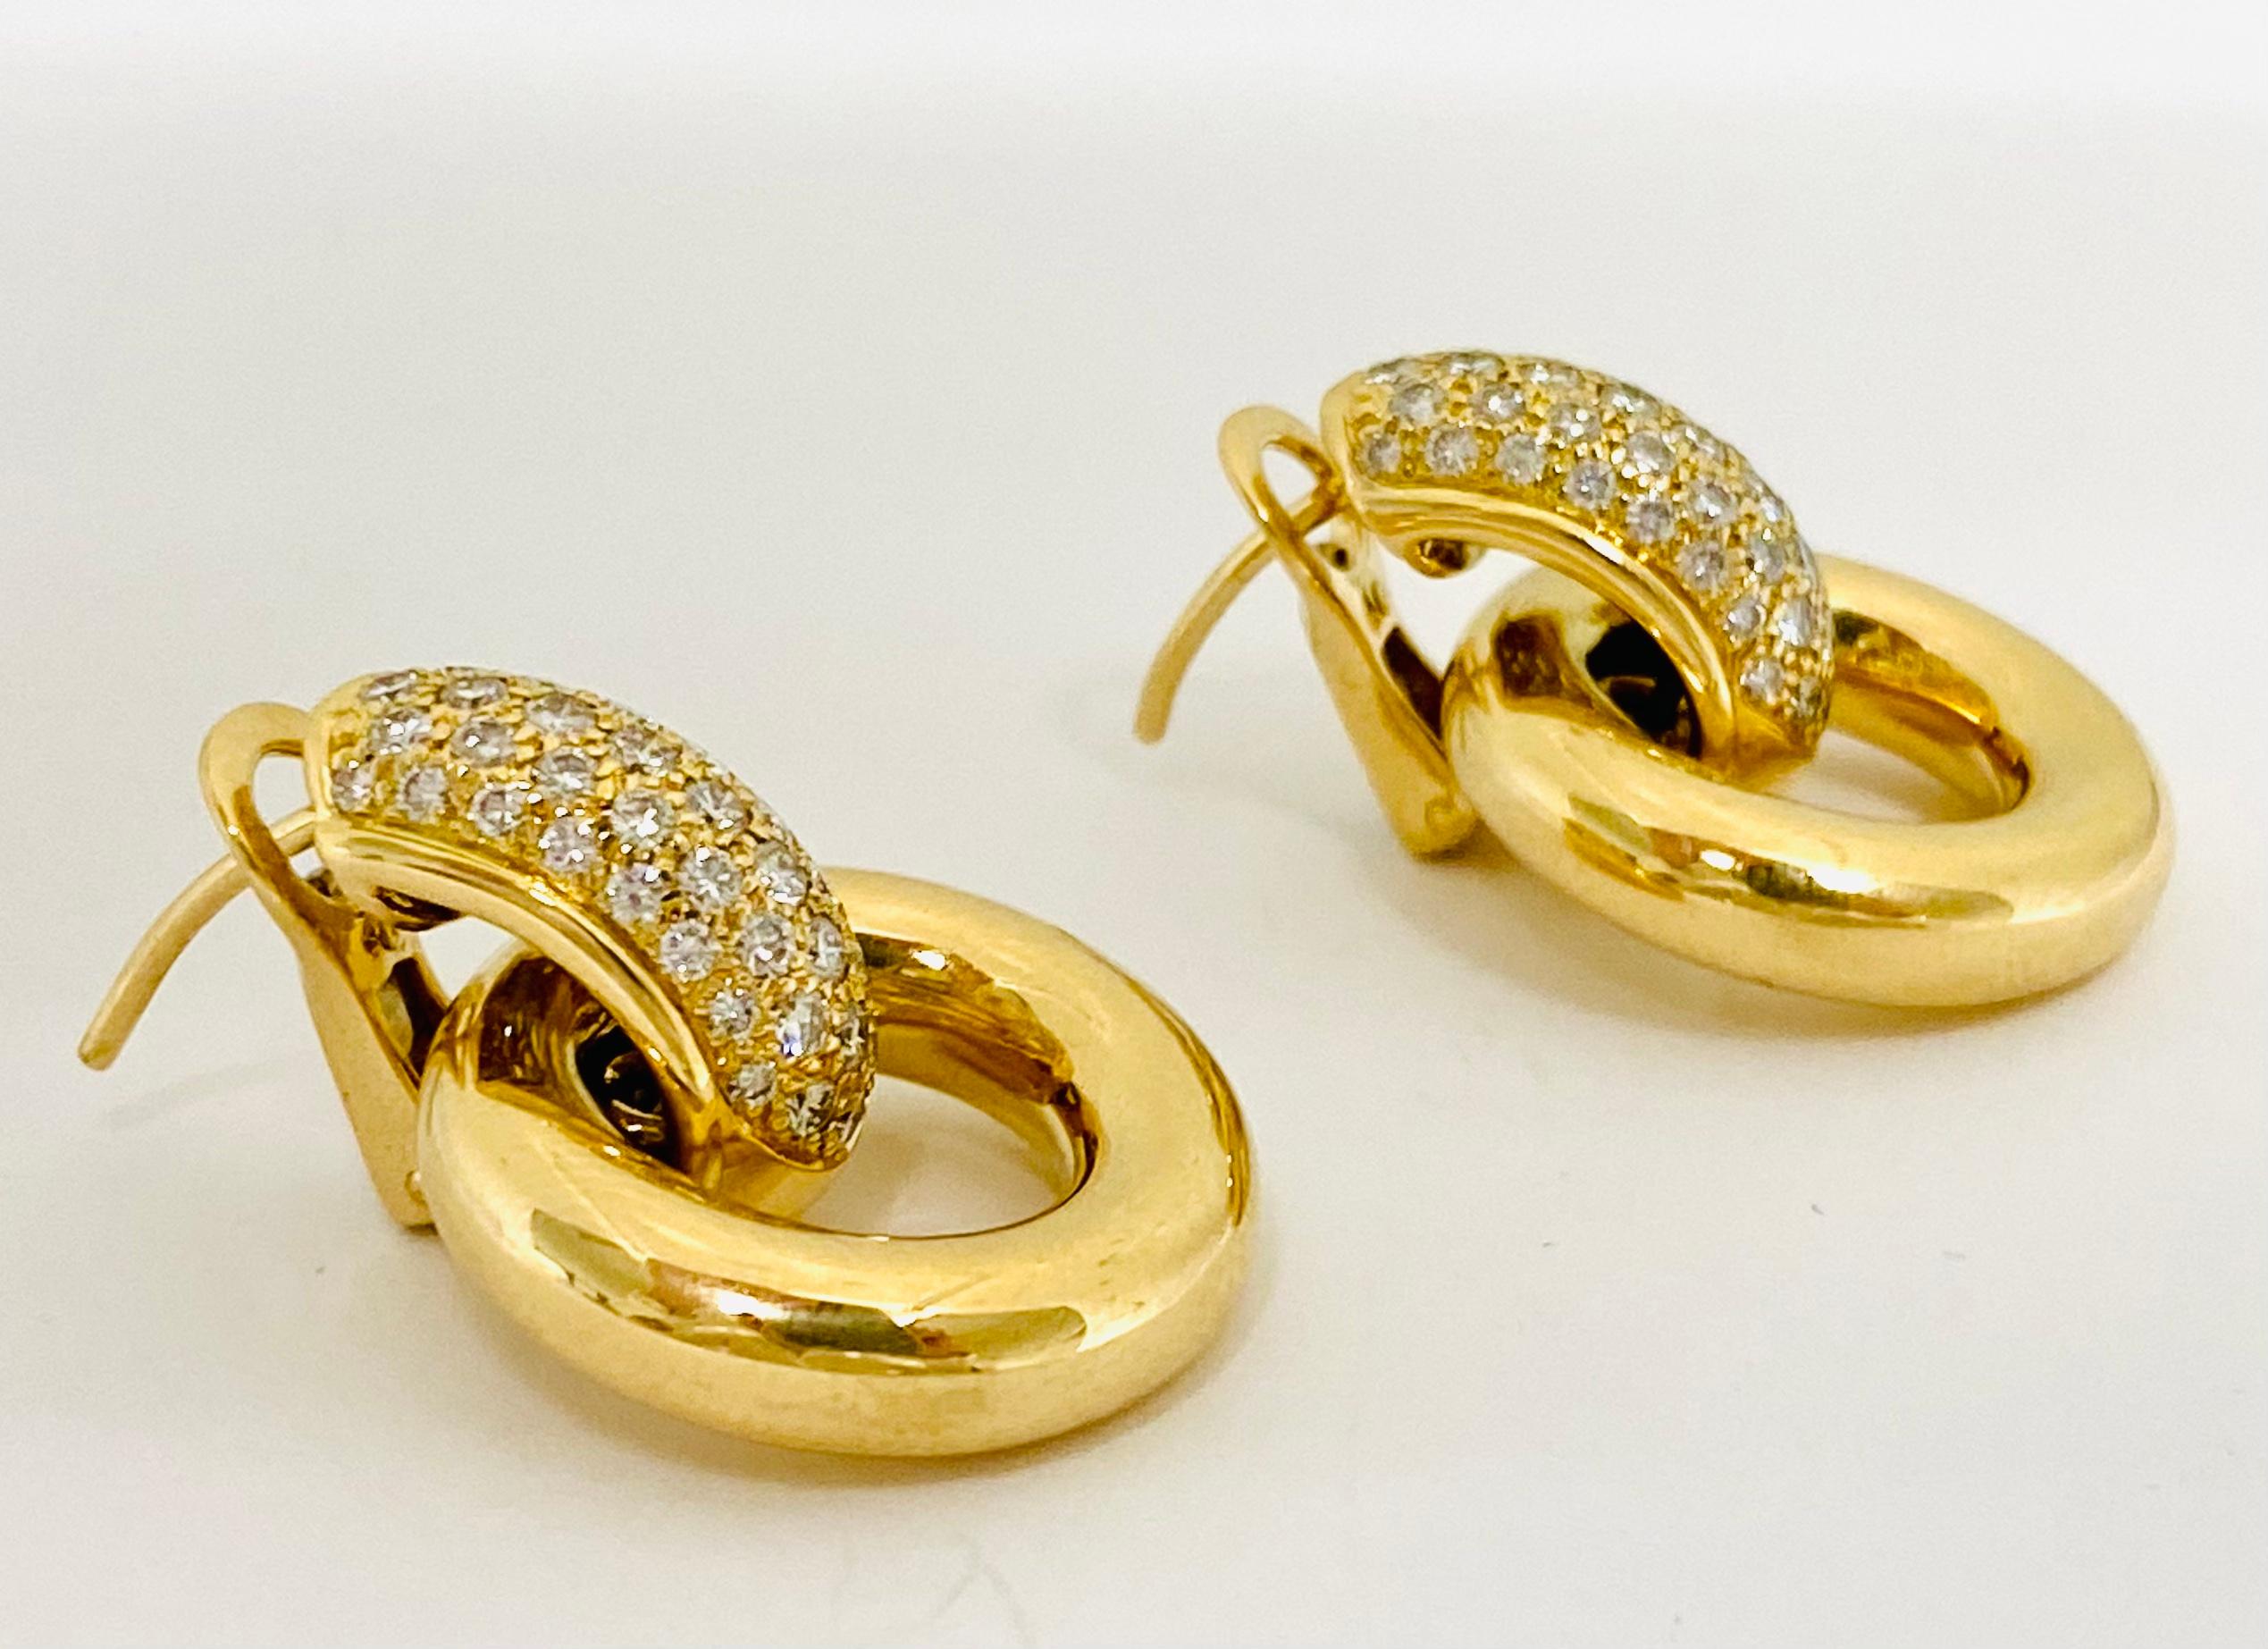 Chaumet Gold Diamond Earrings In Excellent Condition For Sale In Beverly Hills, CA